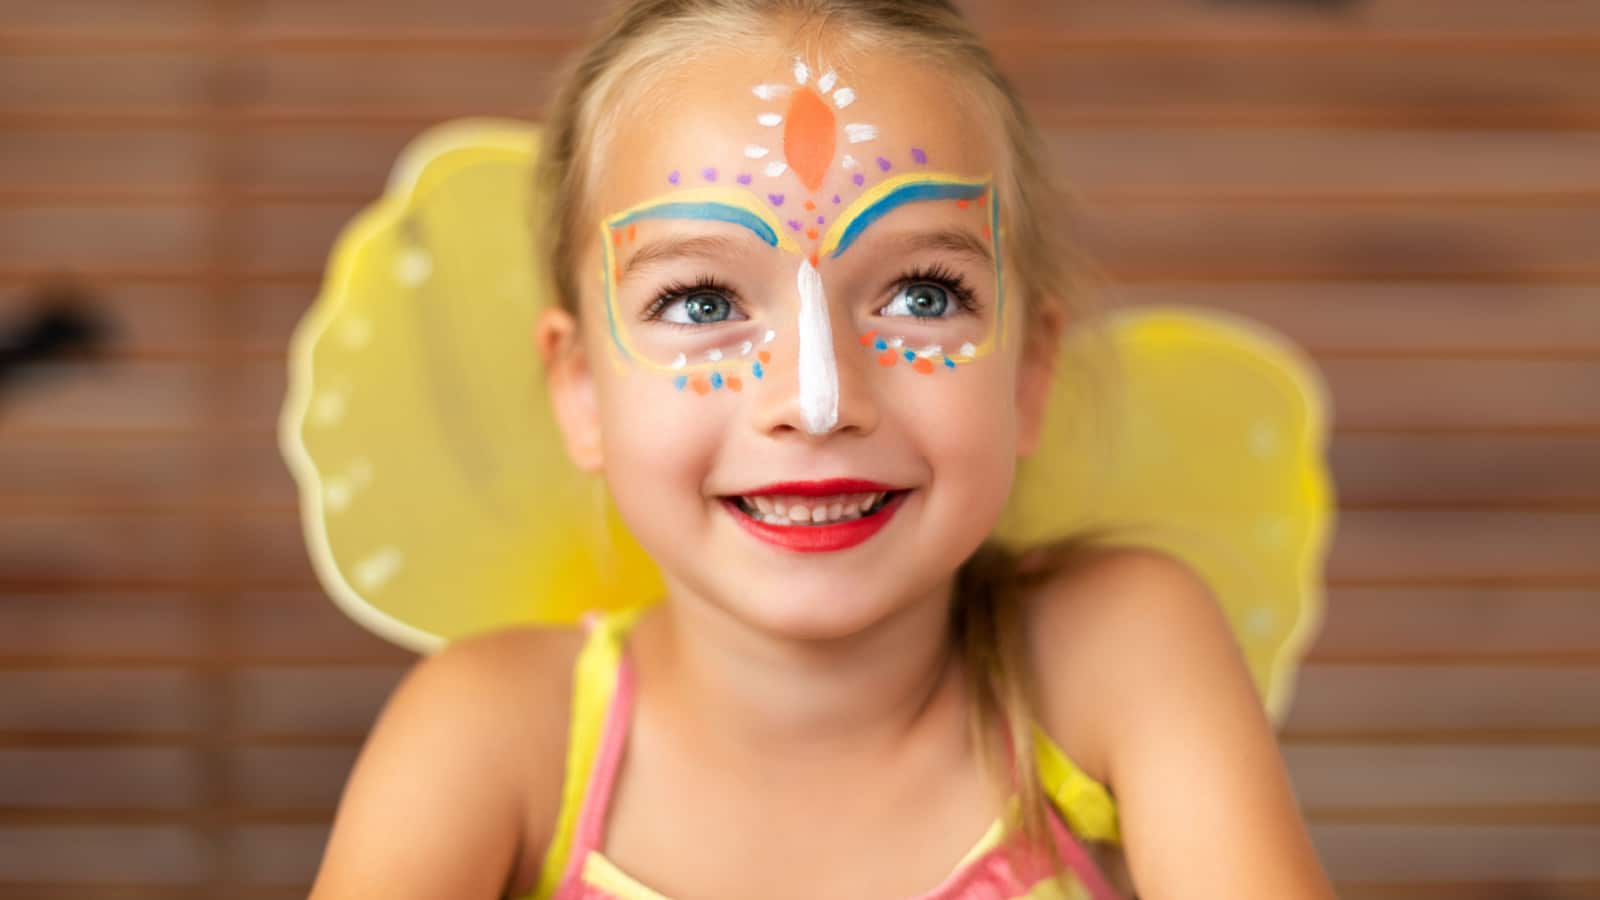 Waist up portrait of cute preschooler with DIY face paint wearing a butterfly halloween or carnival costume.